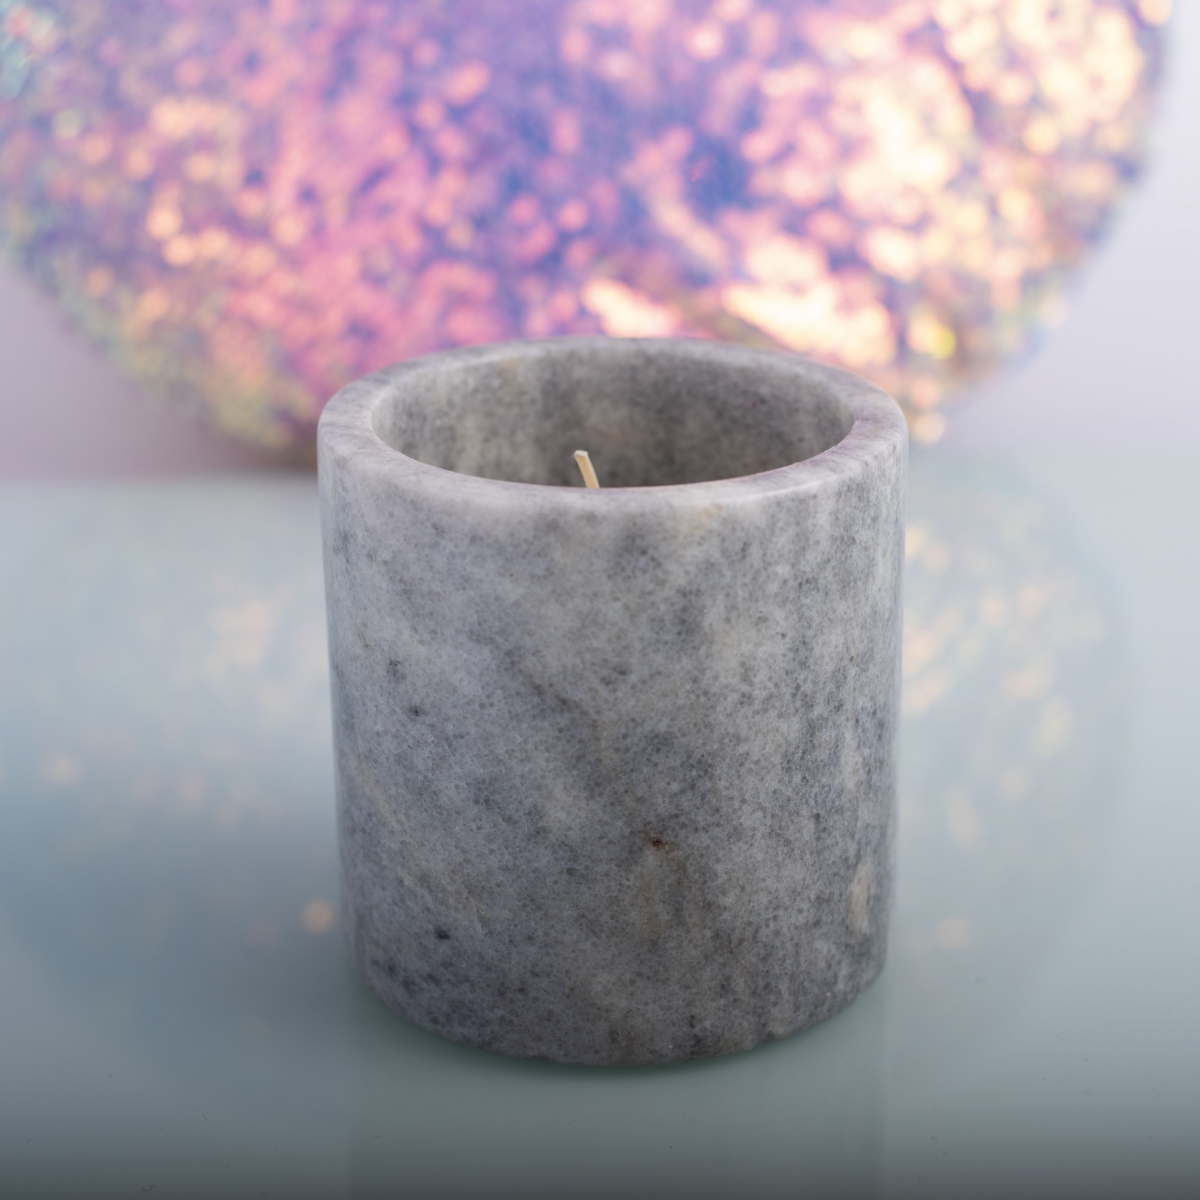 Luxury Scented Candles : Gray Candles ,Marble Jar , Aromatherapy Candles, China Factory , Best Price-HOWCANDLE-Candles,Scented Candles,Aromatherapy Candles,Soy Candles,Vegan Candles,Jar Candles,Pillar Candles,Candle Gift Sets,Essential Oils,Reed Diffuser,Candle Holder,